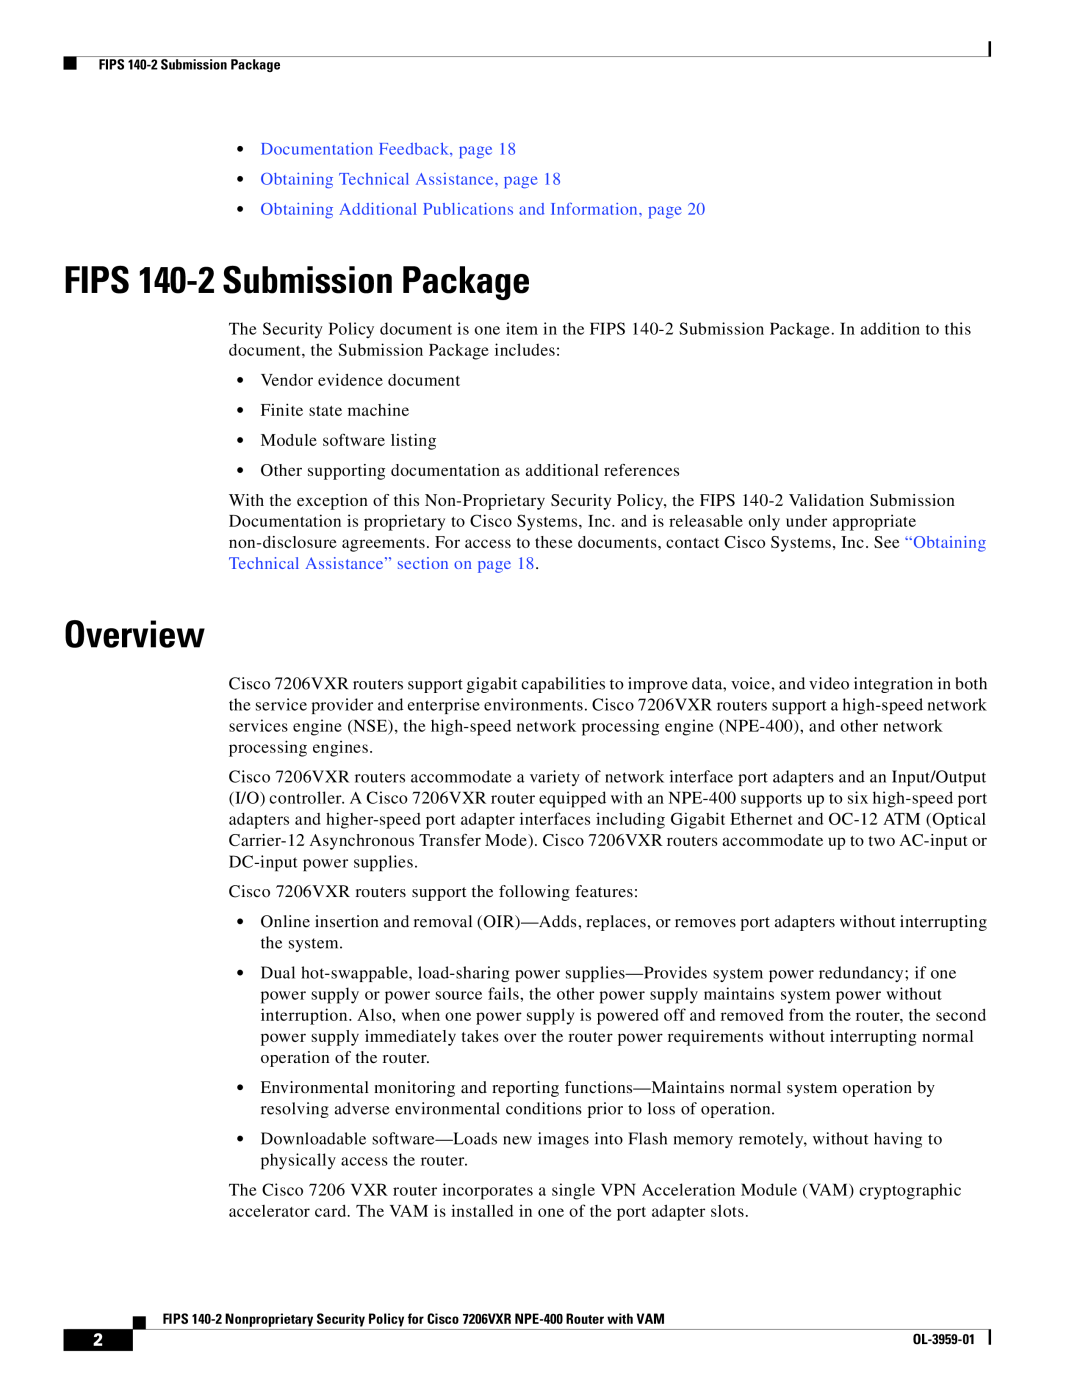 Cisco Systems 7206VXR NPE-400 manual FIPS 140-2 Submission Package, Overview 